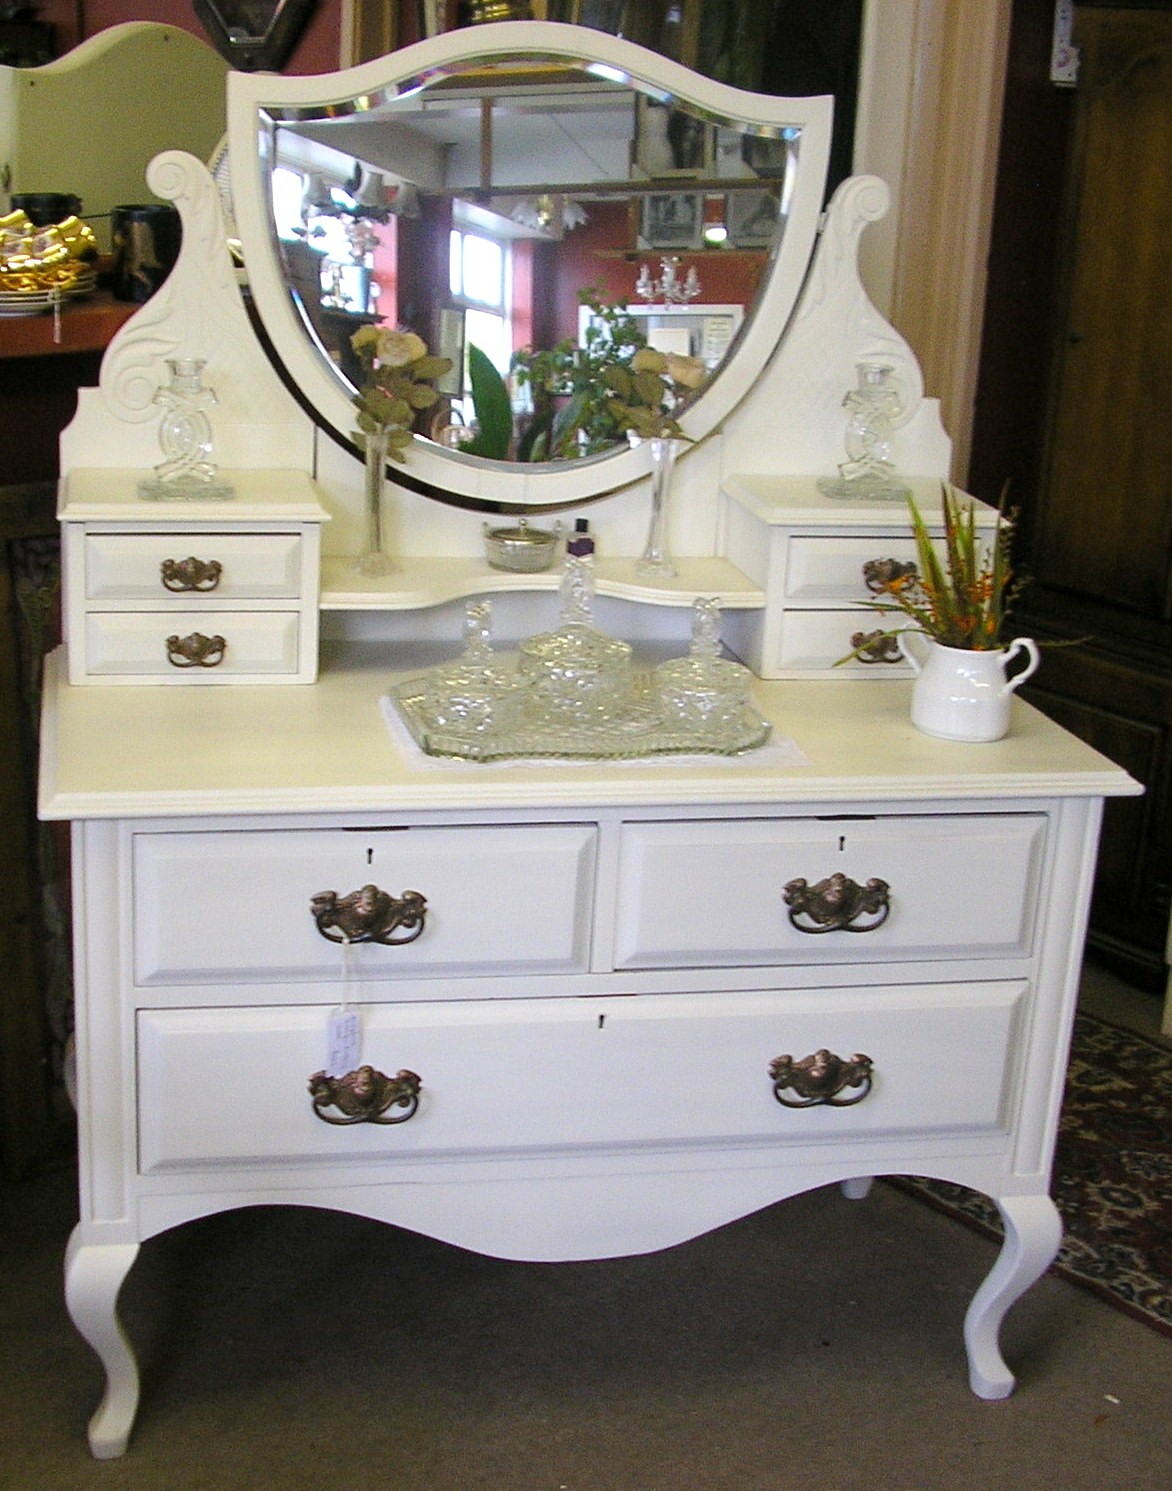 Models of mirror vanity table design beds house decor